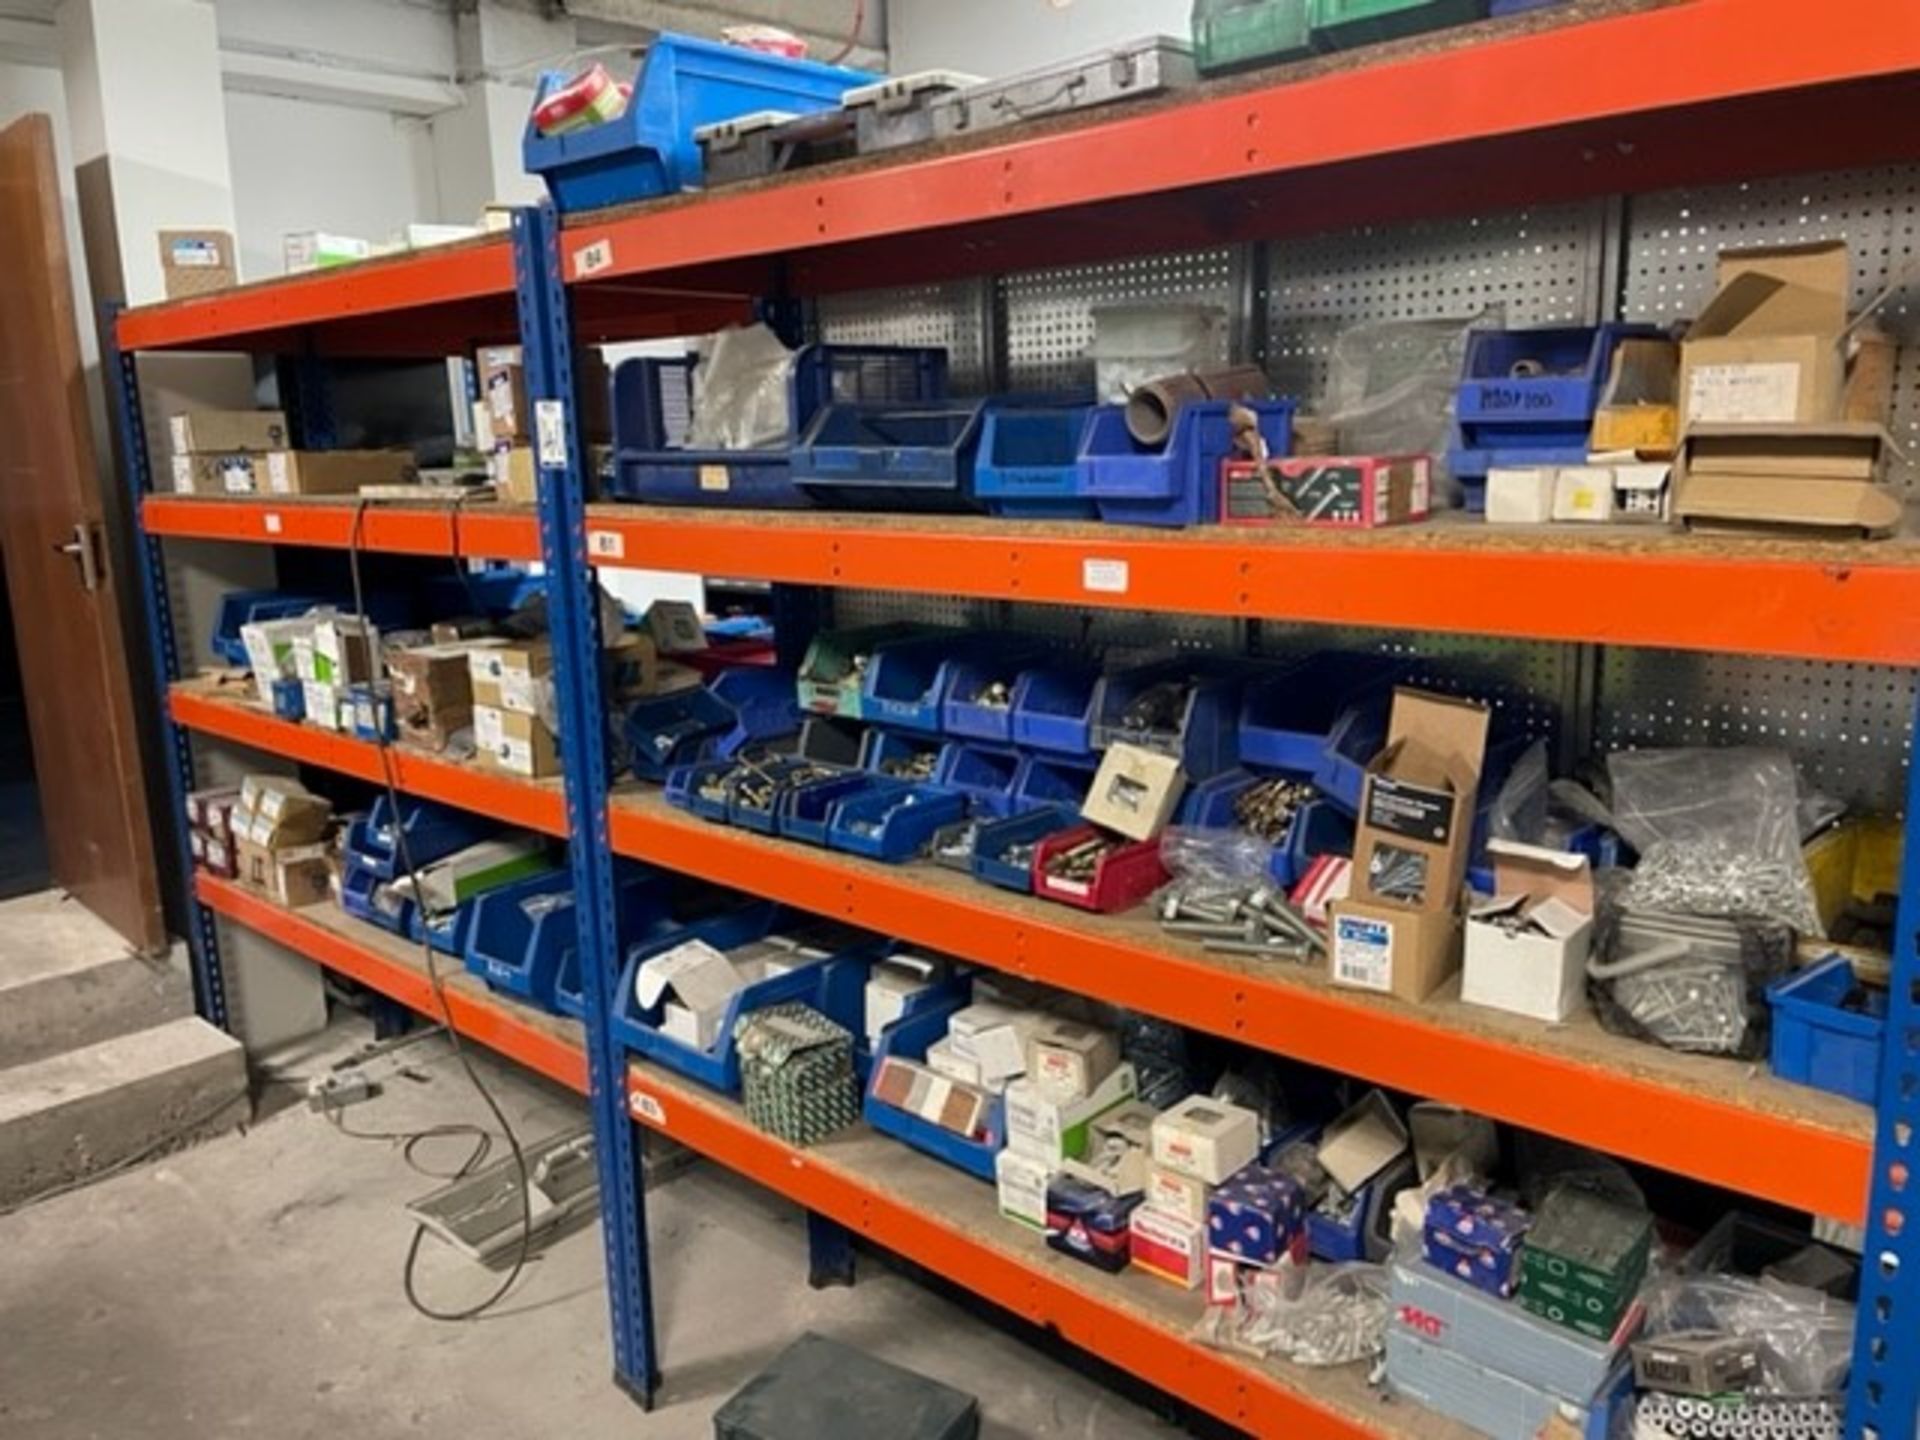 Contents of 2 bays of Blue/Orange shelving at rear comprising Lin Bins & contents of assorted